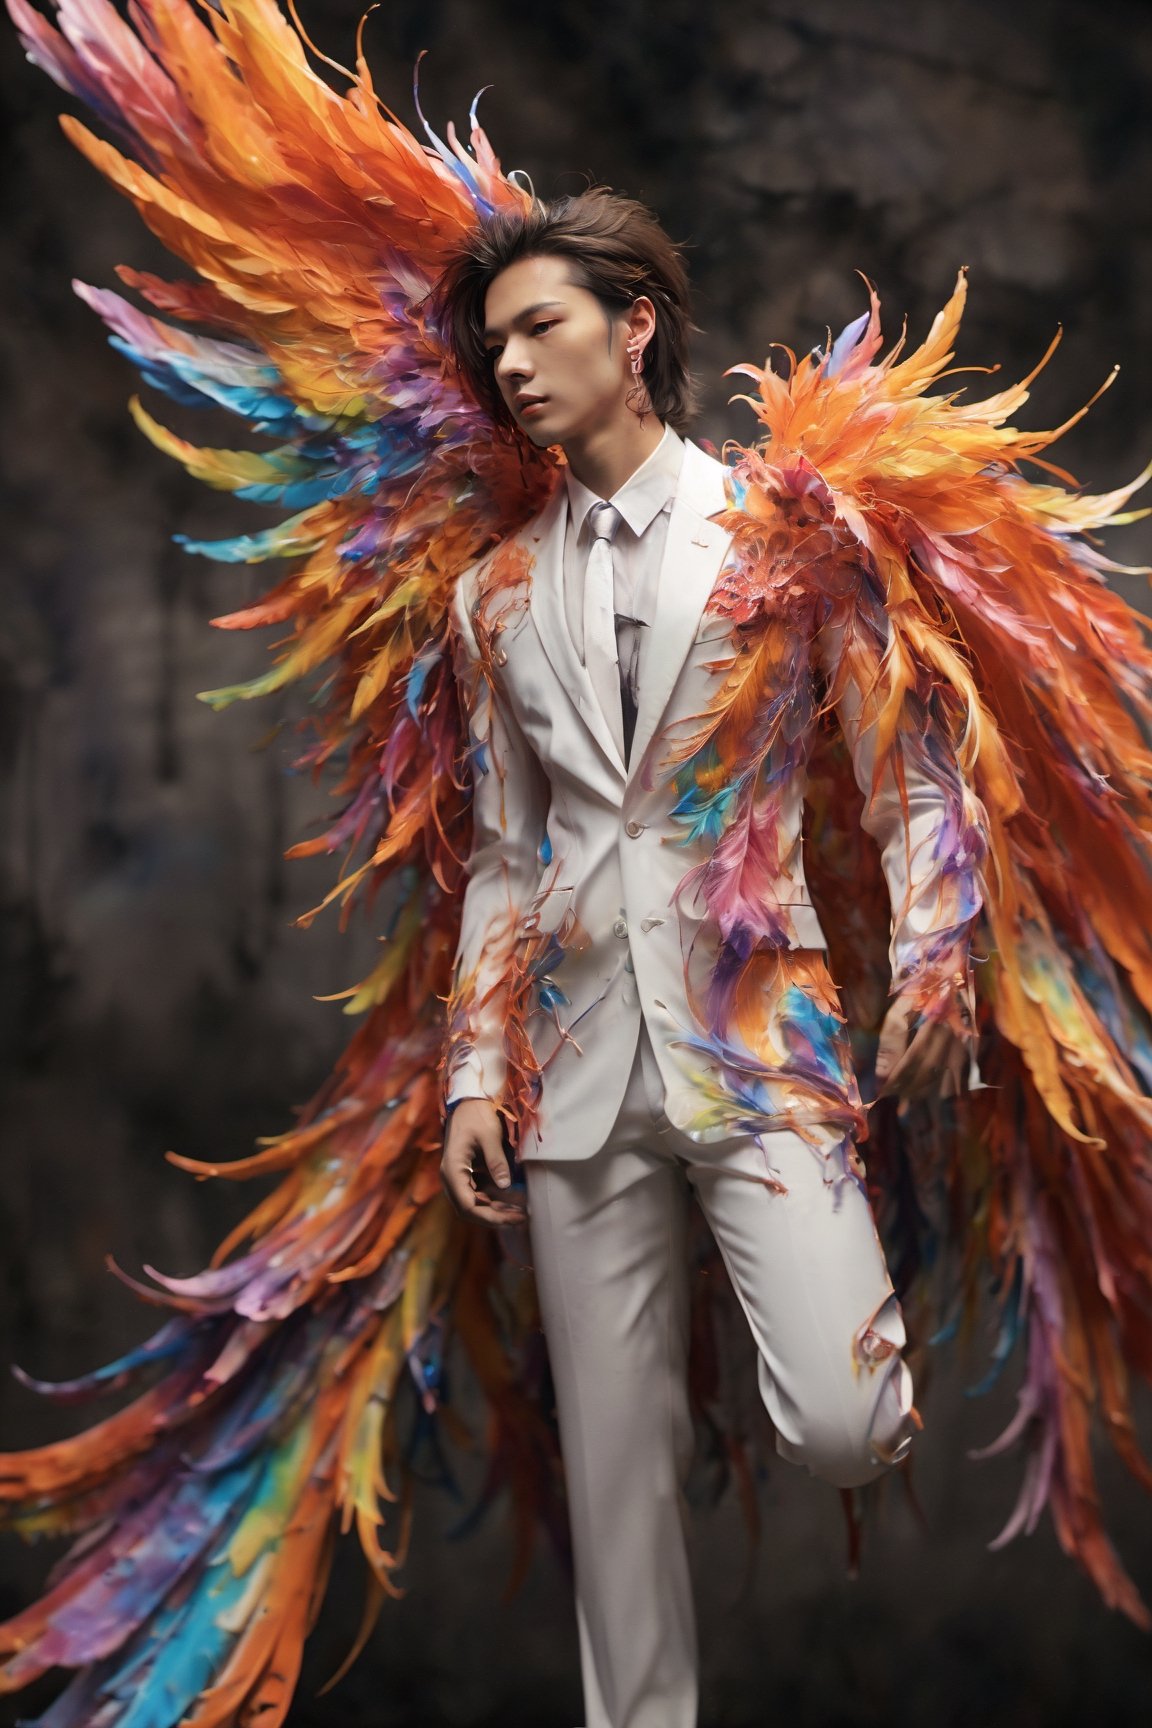 Create an image of a young man wearing a suit, featuring vibrant, crystal  wings extending from his back. Random movement The background should be plain white, emphasizing the contrast and detailing of the beauty wings and the sharpness of the suit. The man should appear poised and elegant, with the wings unfurled to showcase a spectrum of vivid hues, blending seamlessly from one color to another. The focus should be on the meticulous details of the wings’ feathers and the suit’s fabric, capturing a harmonious blend of natural and refined elements, wings,Stylish, close up,l3min,xxmixgirl,fire element,wings